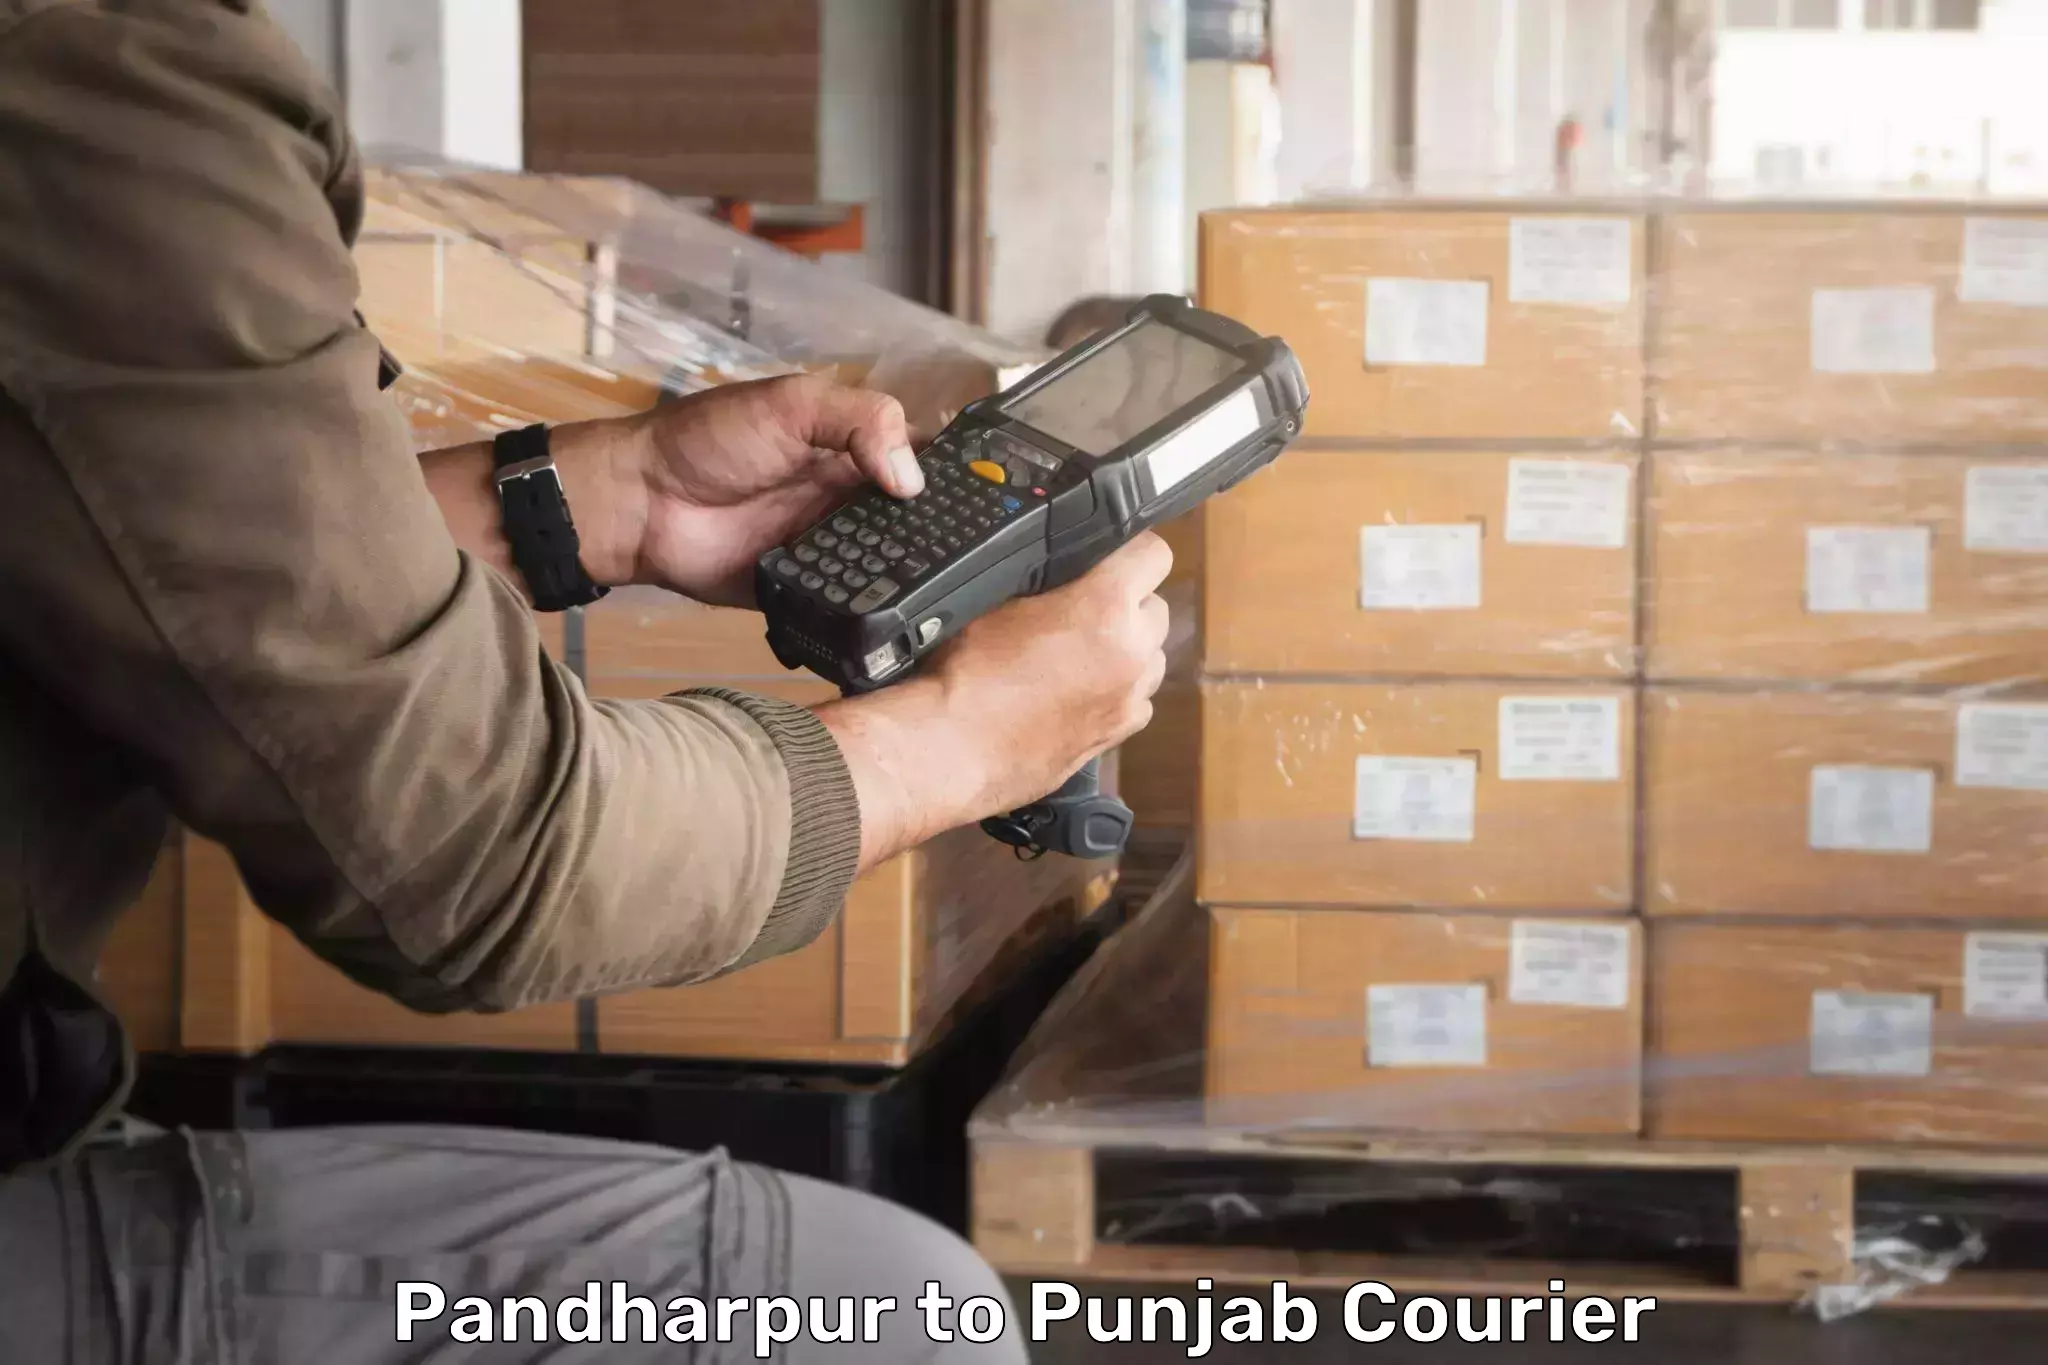 Nationwide shipping coverage in Pandharpur to Mohali